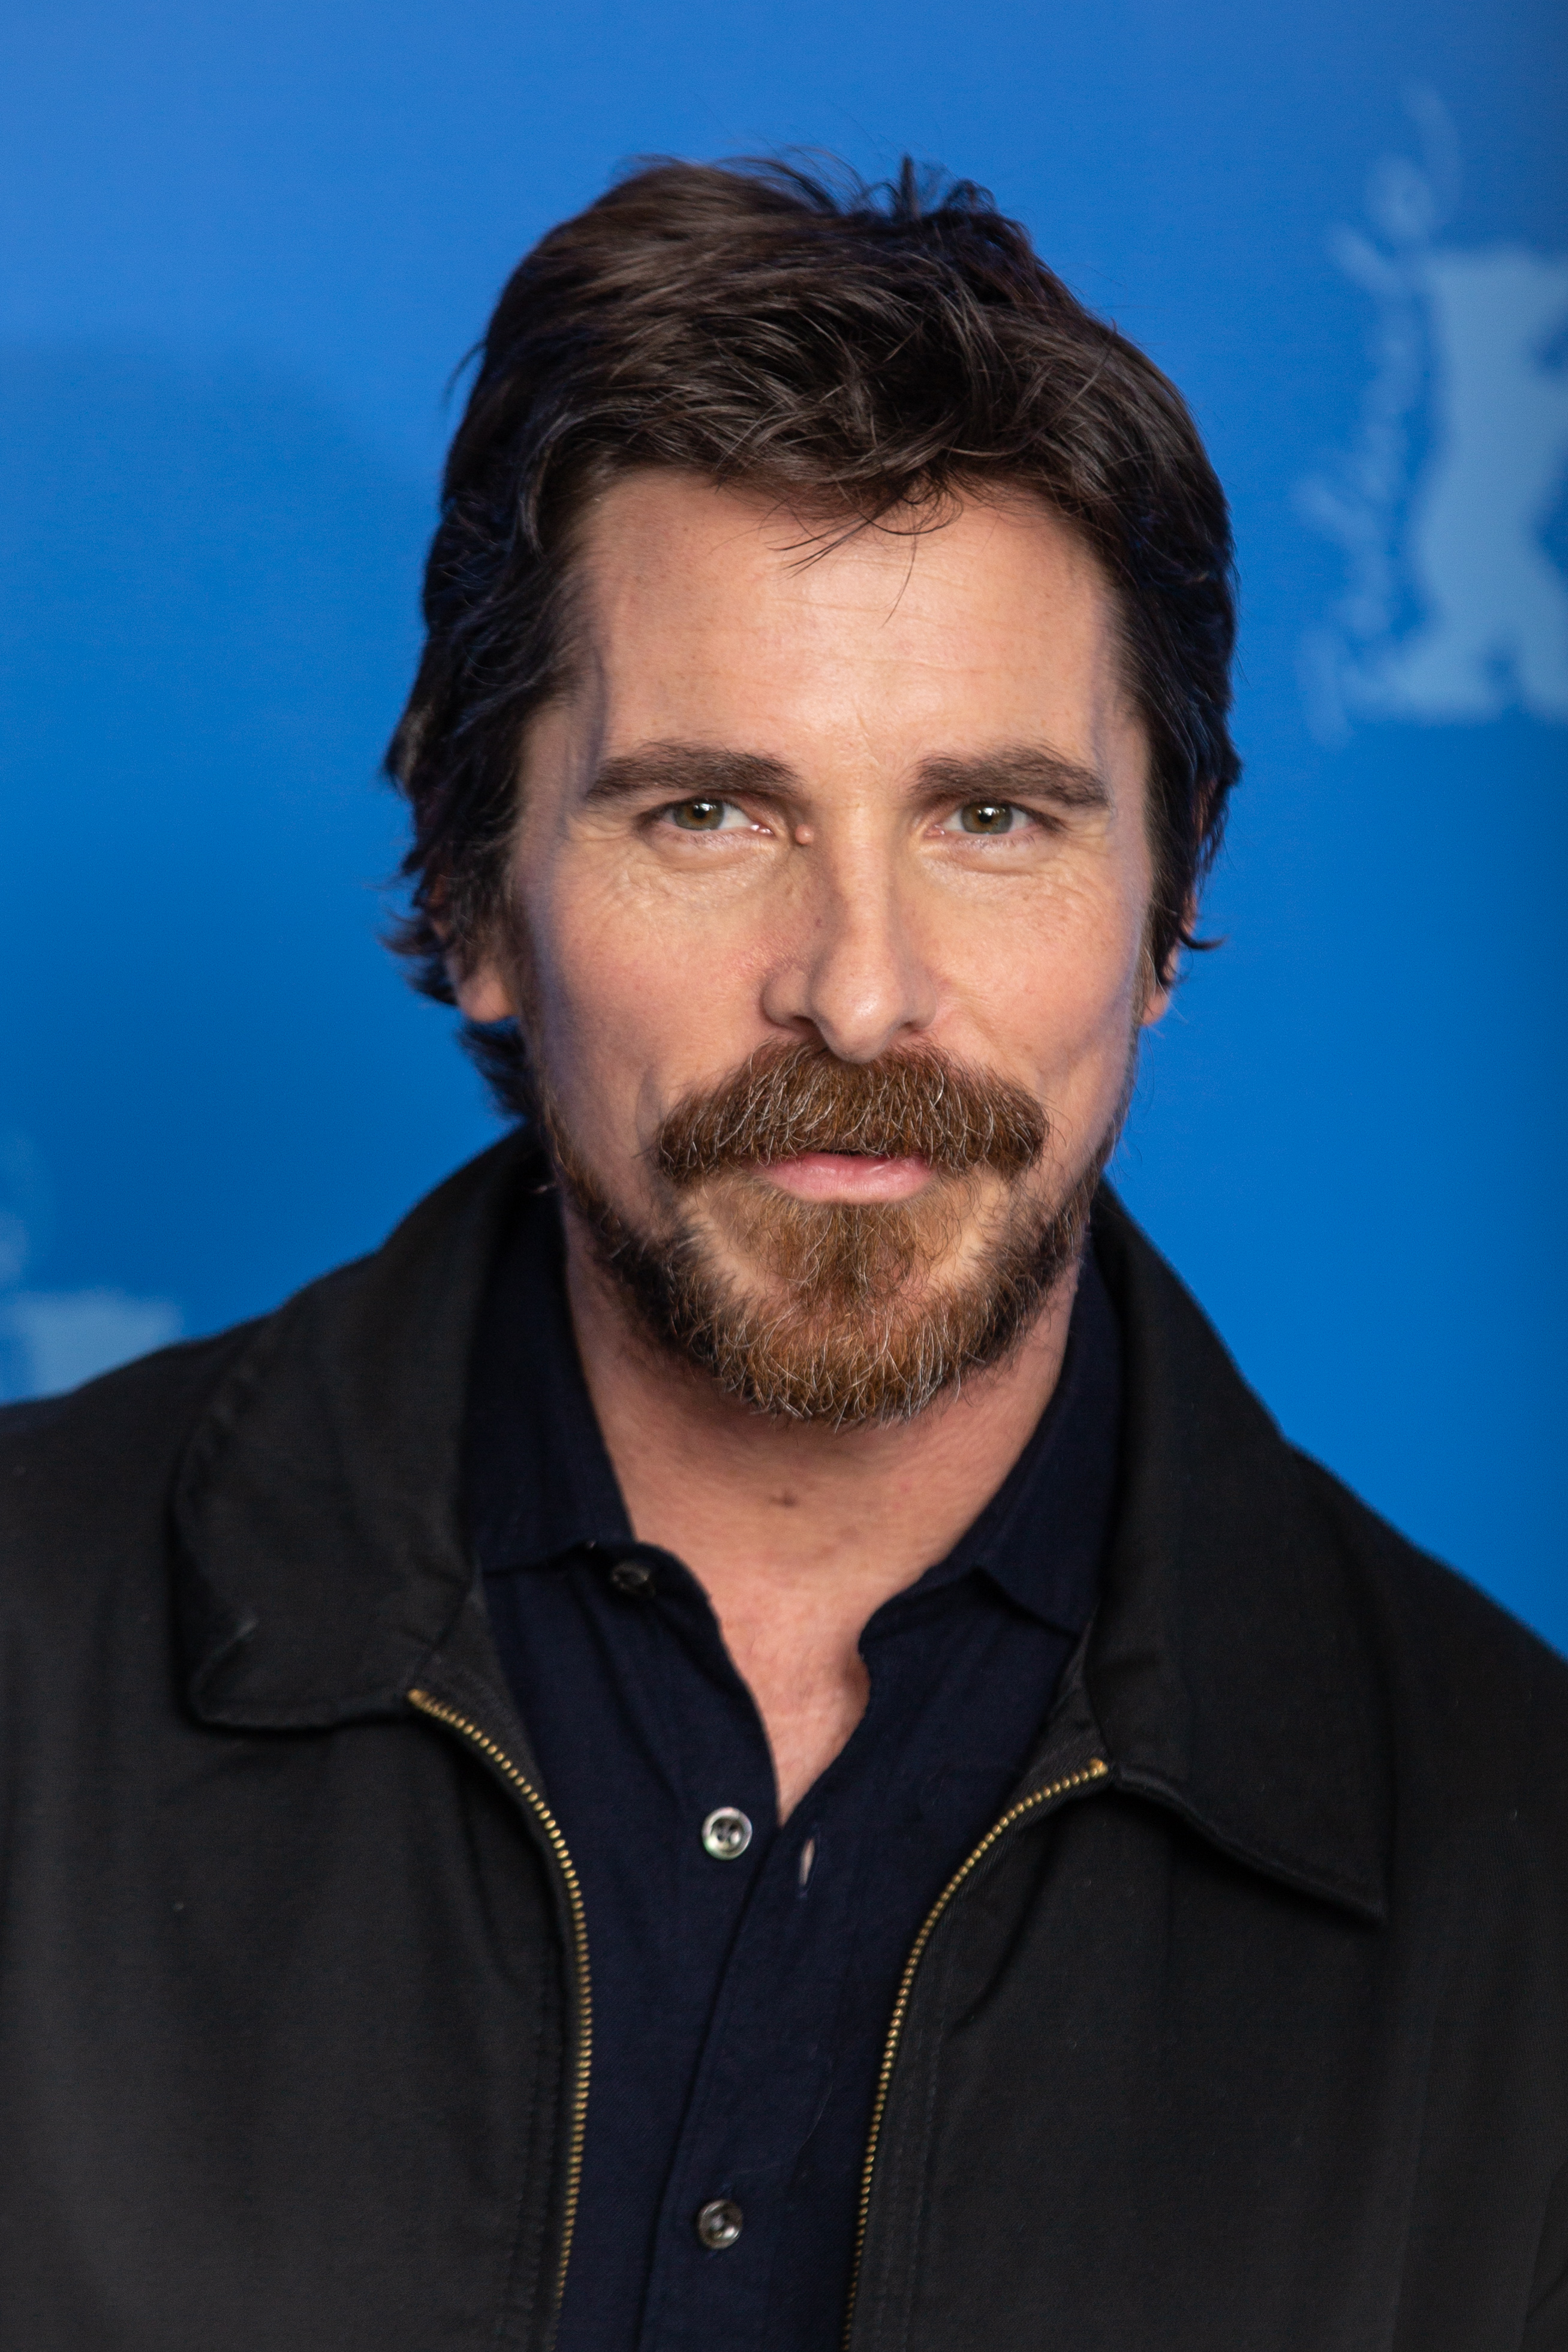 Christian Bale Net Worth In 2022 - Is He The Highest Paid Batman?